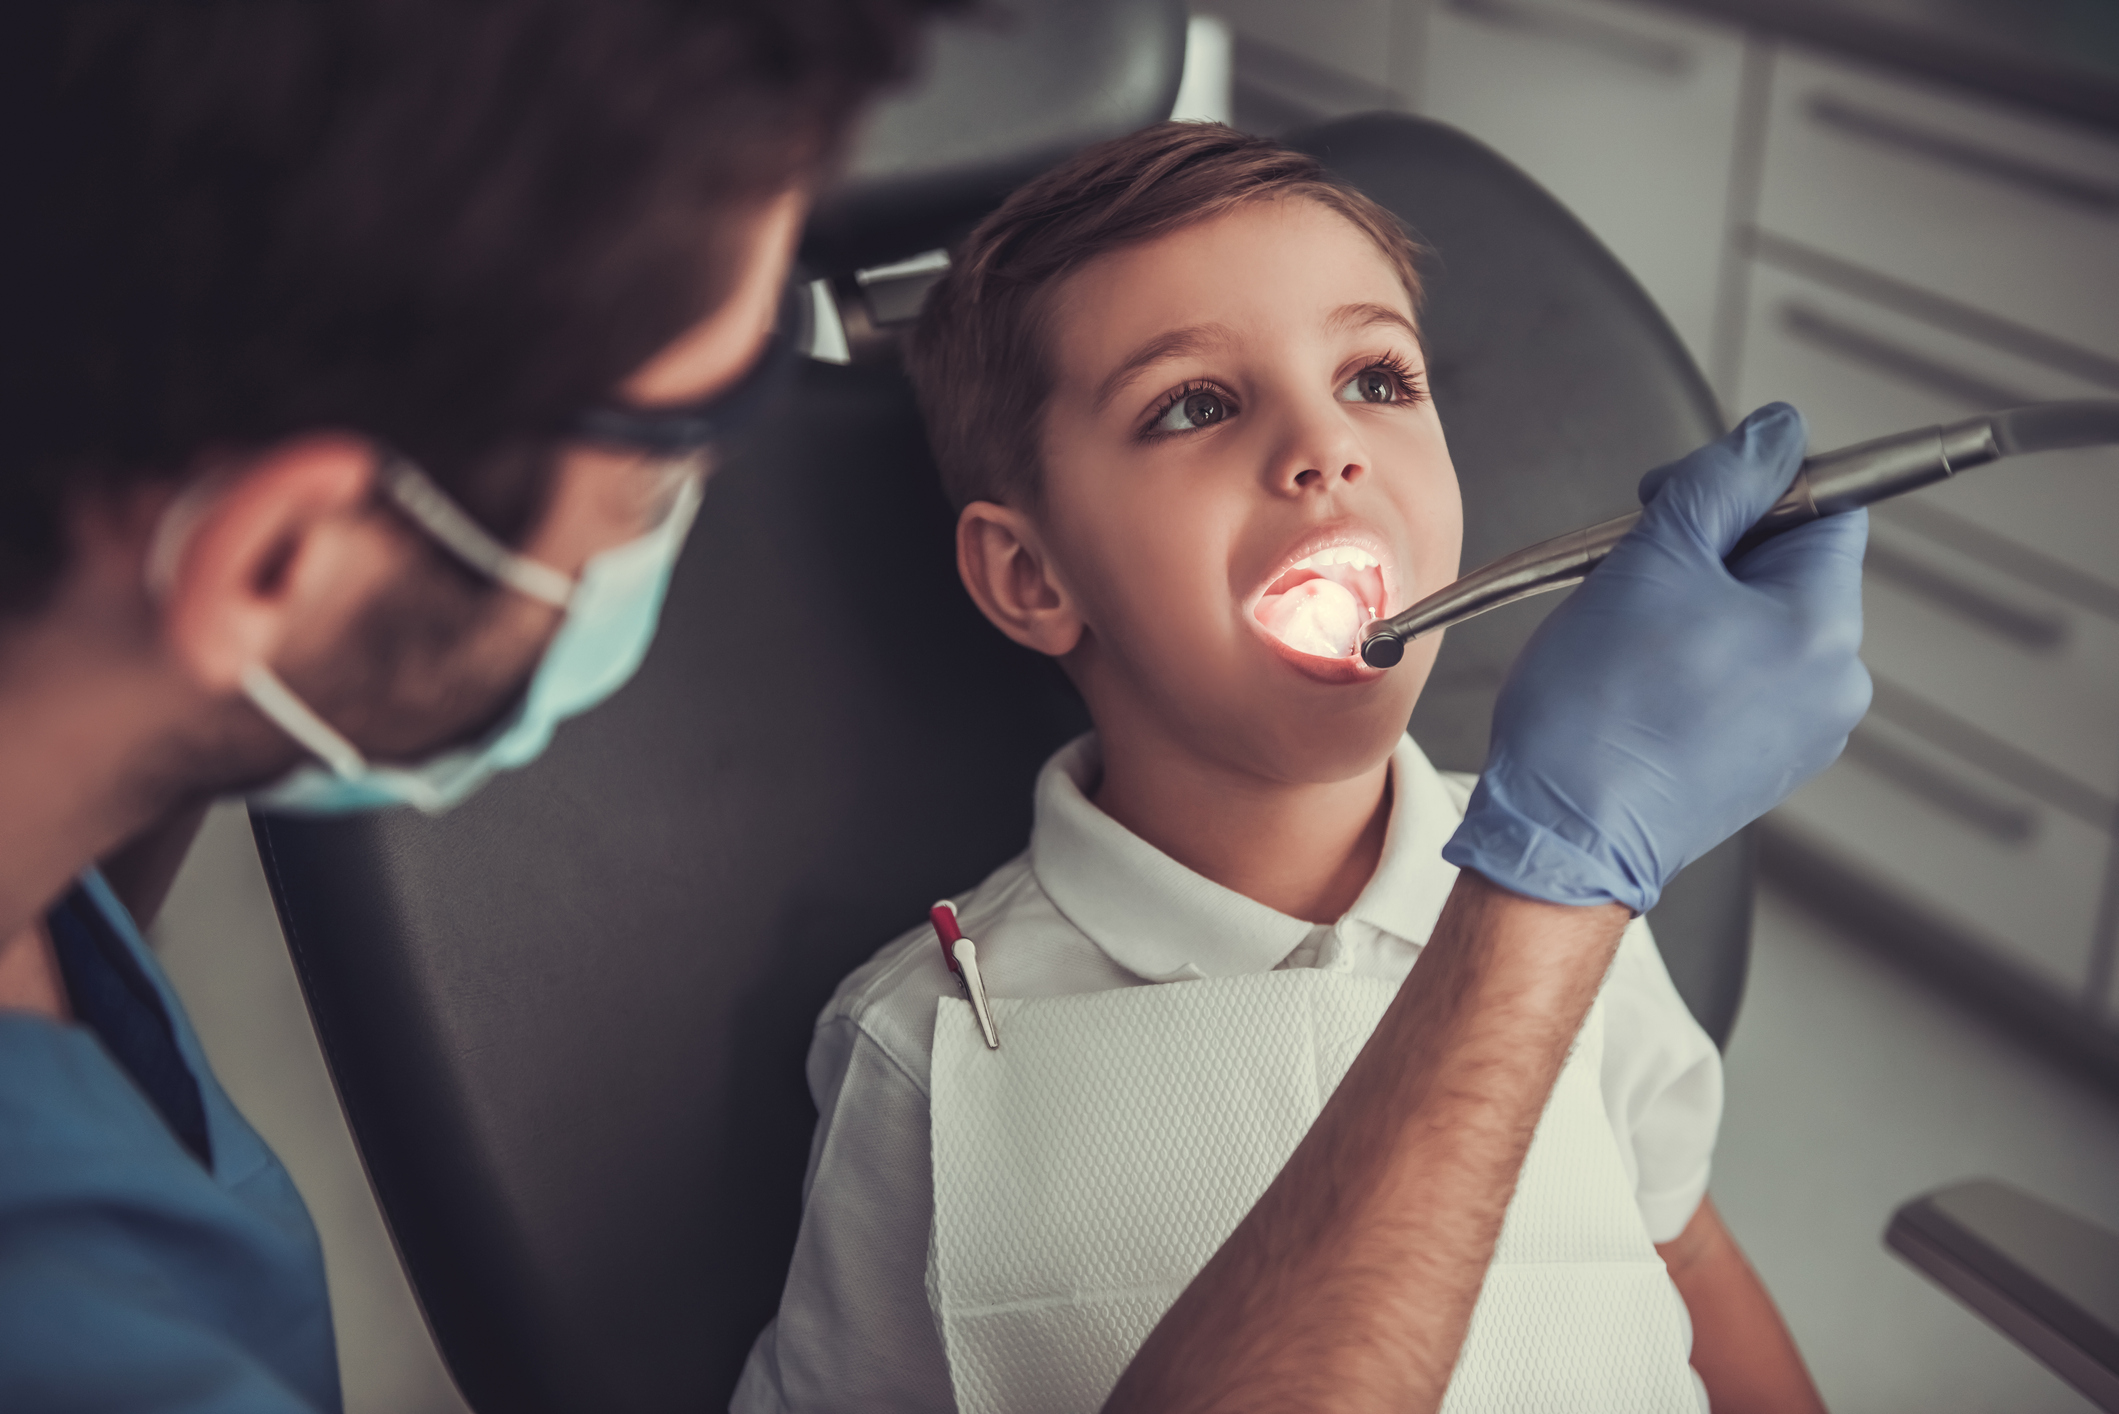 Dentist examines young boy’s mouth